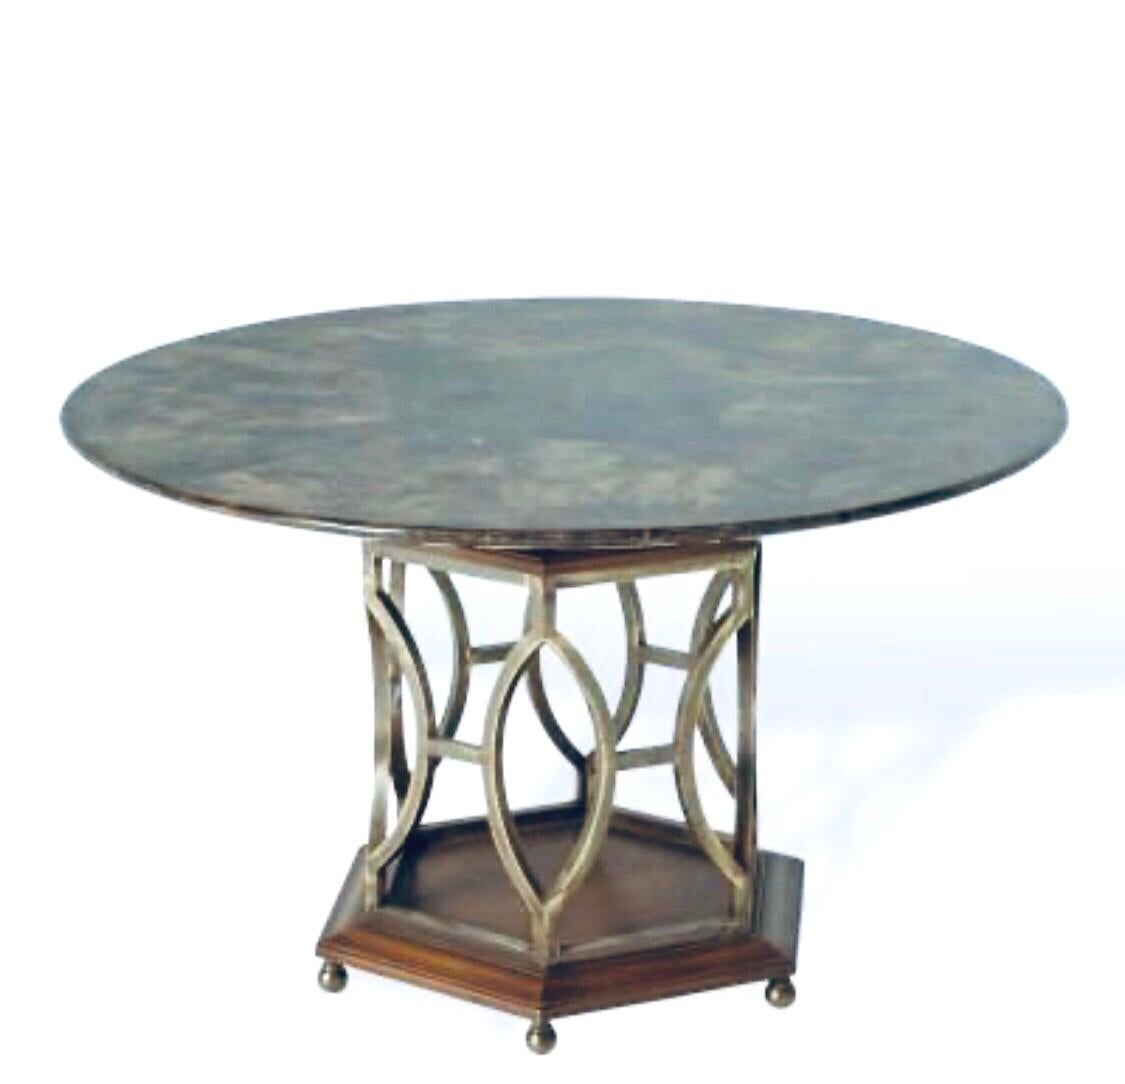 Beautiful and rare lacquered goatskin top with patinated brass and wood base, circa 1970s, Made in Italy original condition the brass base can be polished if desired but we left it in AS/IS condition. A great addition to any Hollywood Regency , Mid